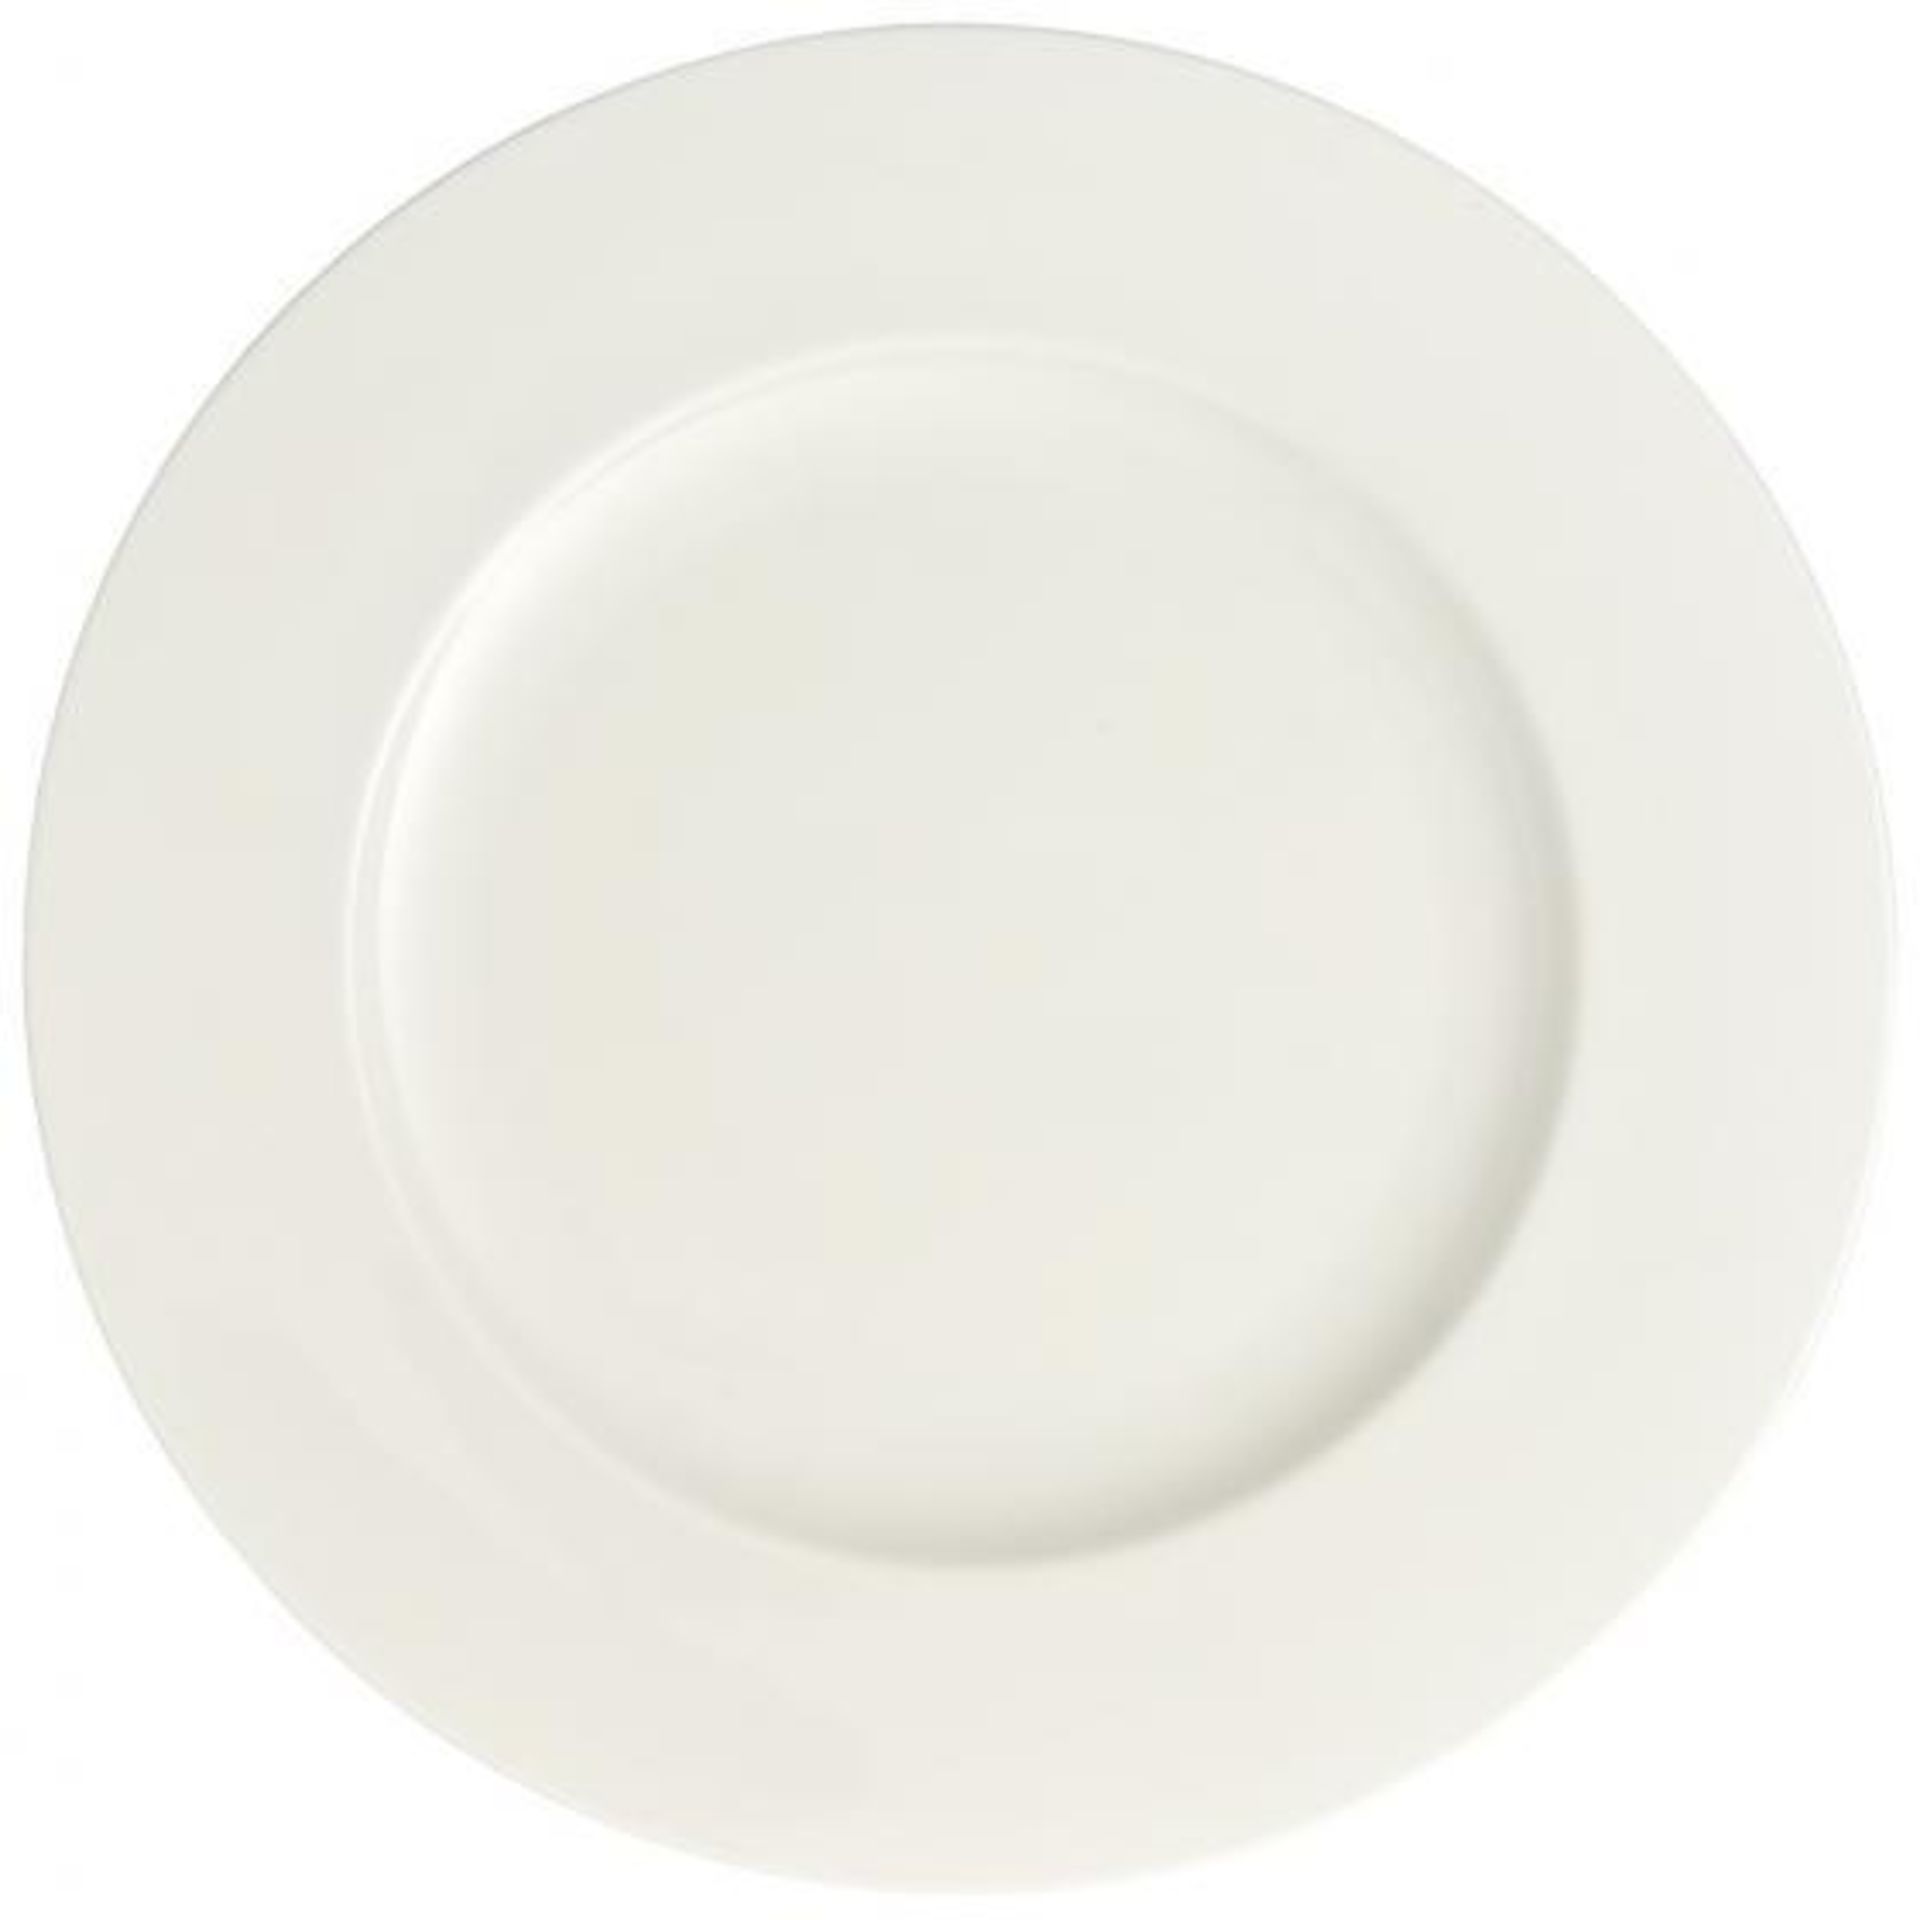 6 x Villeroy & Boch Royal Dinner Plate -290mm (29cm) - Ref: 1044122620 - New and boxed - CL011 - MC5